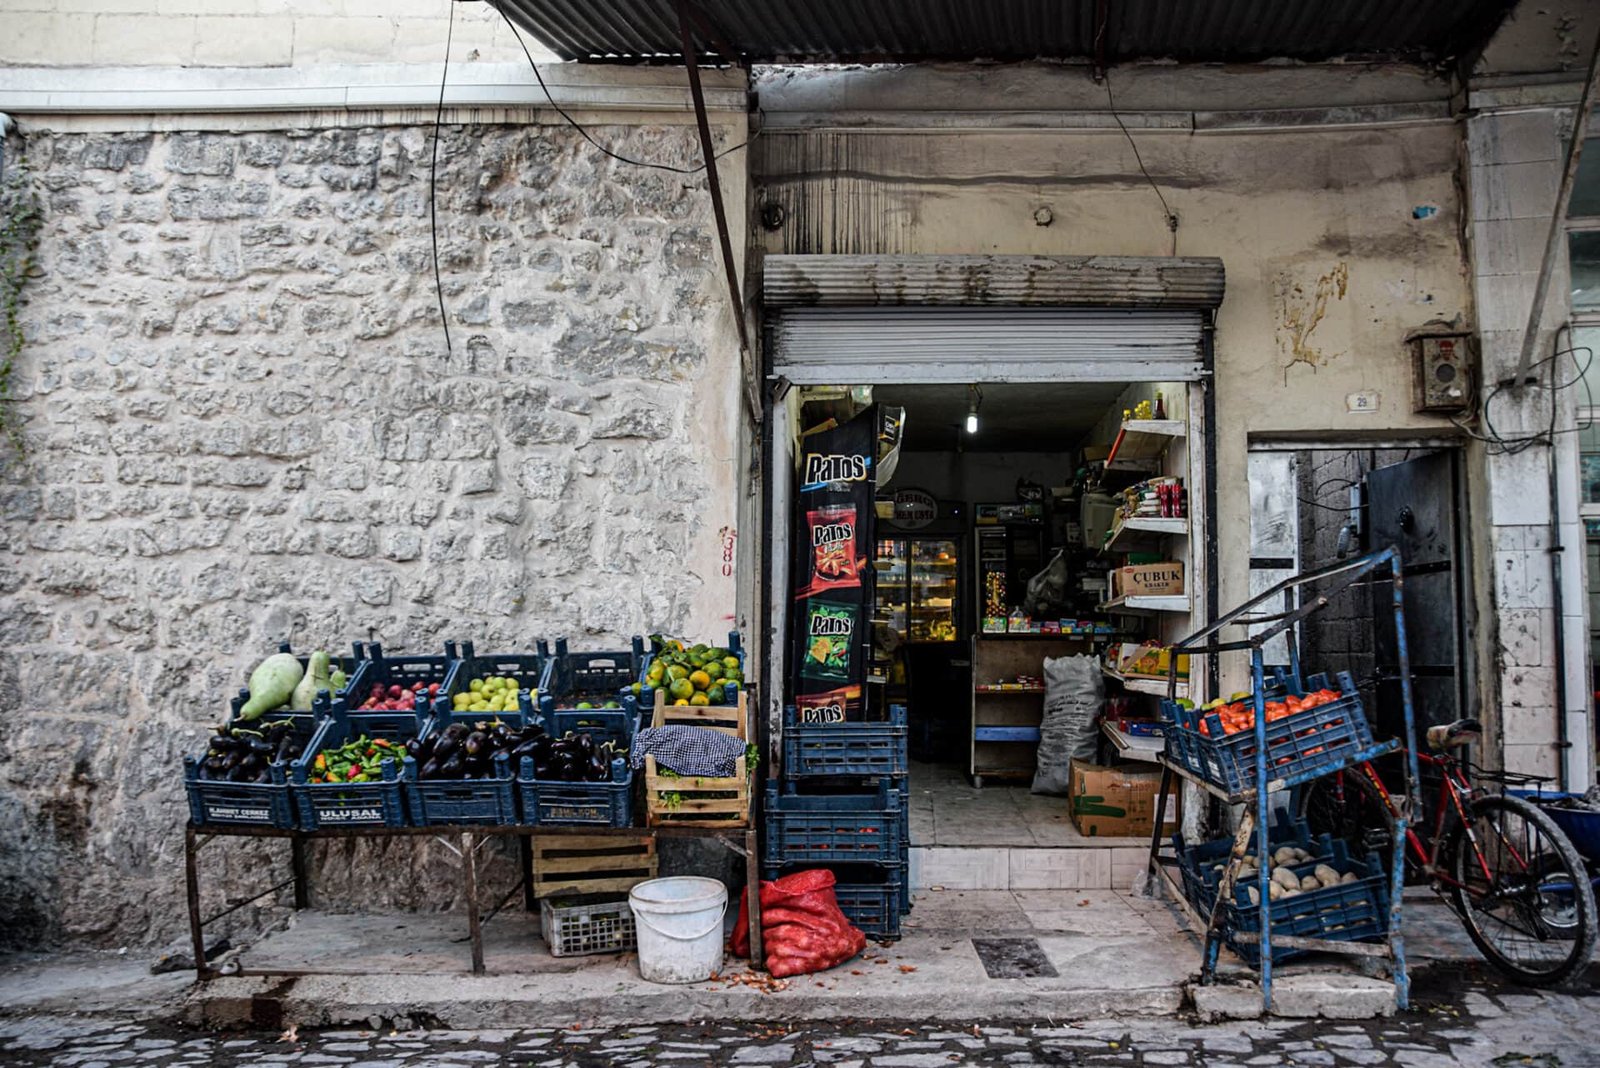 blue shelves filled with fruits and vegetables in front of a small shop in Sanliurfa's old town